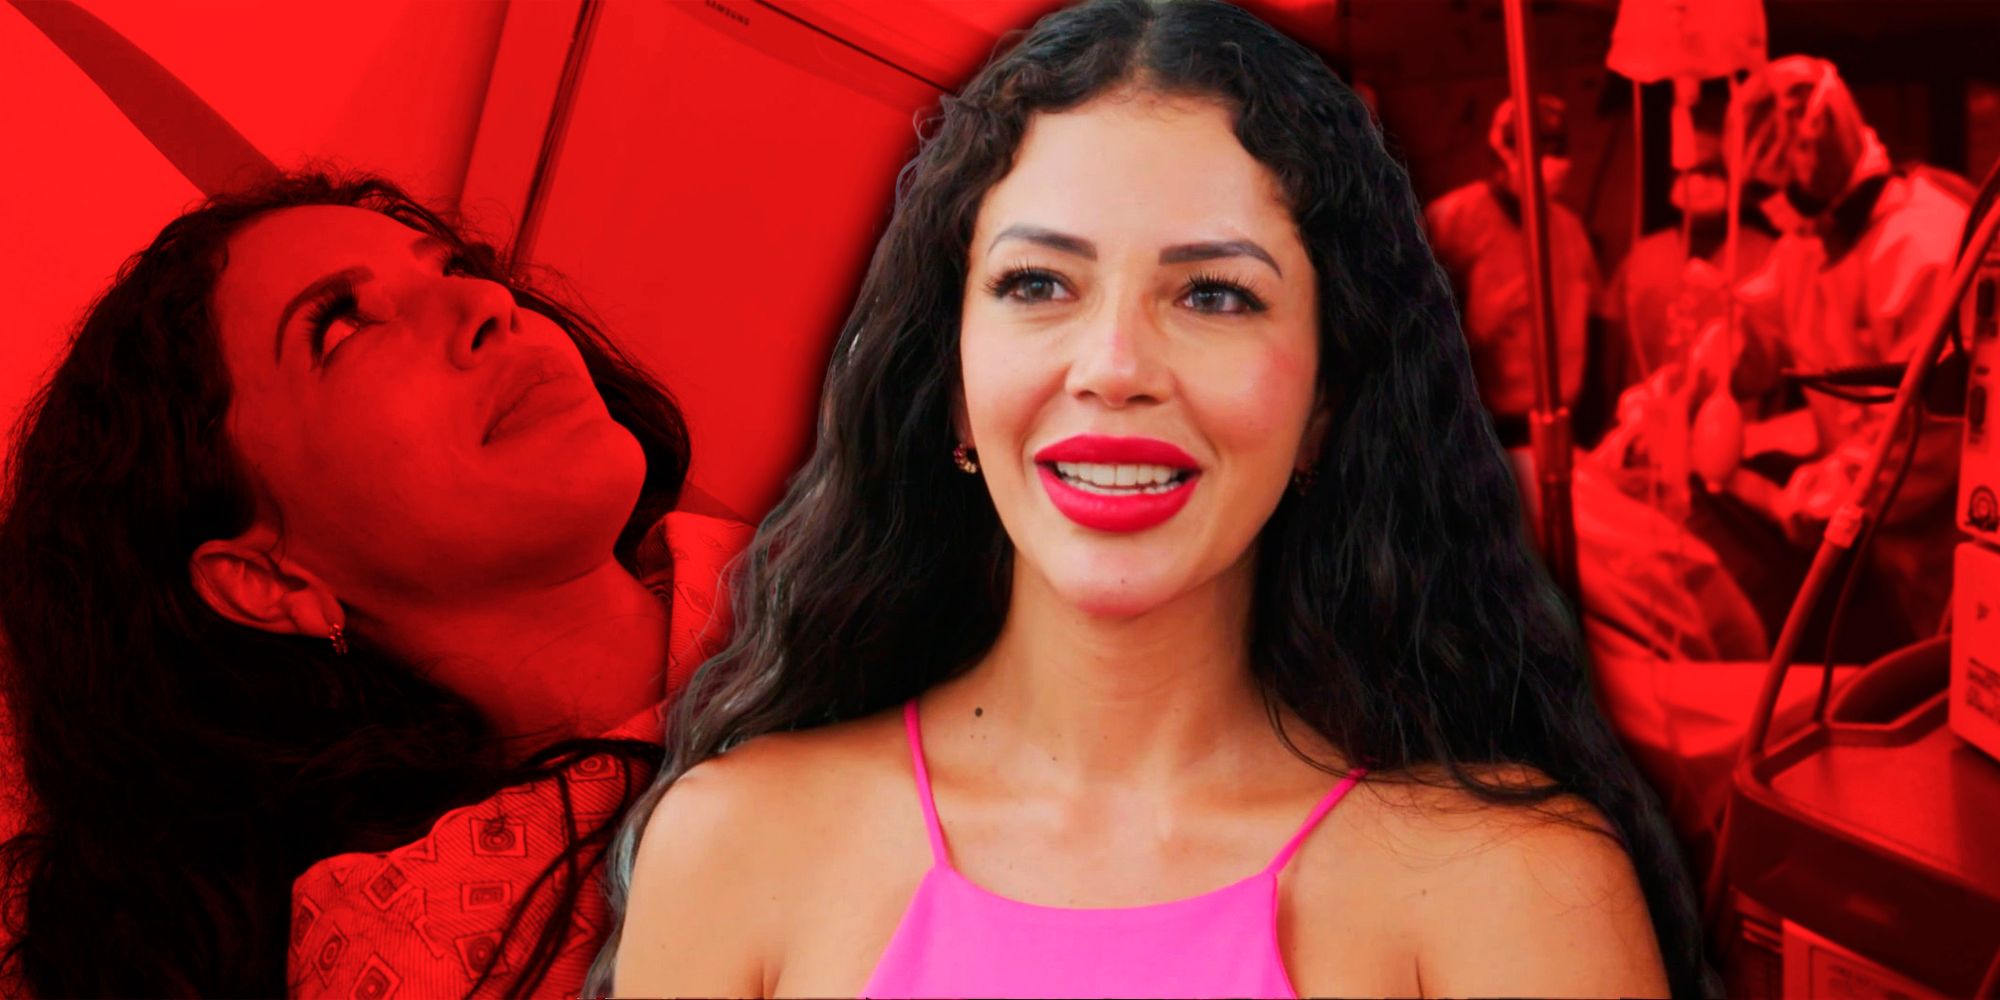 Jasmine montage from 90 Day Fiance pink top red lipstick 